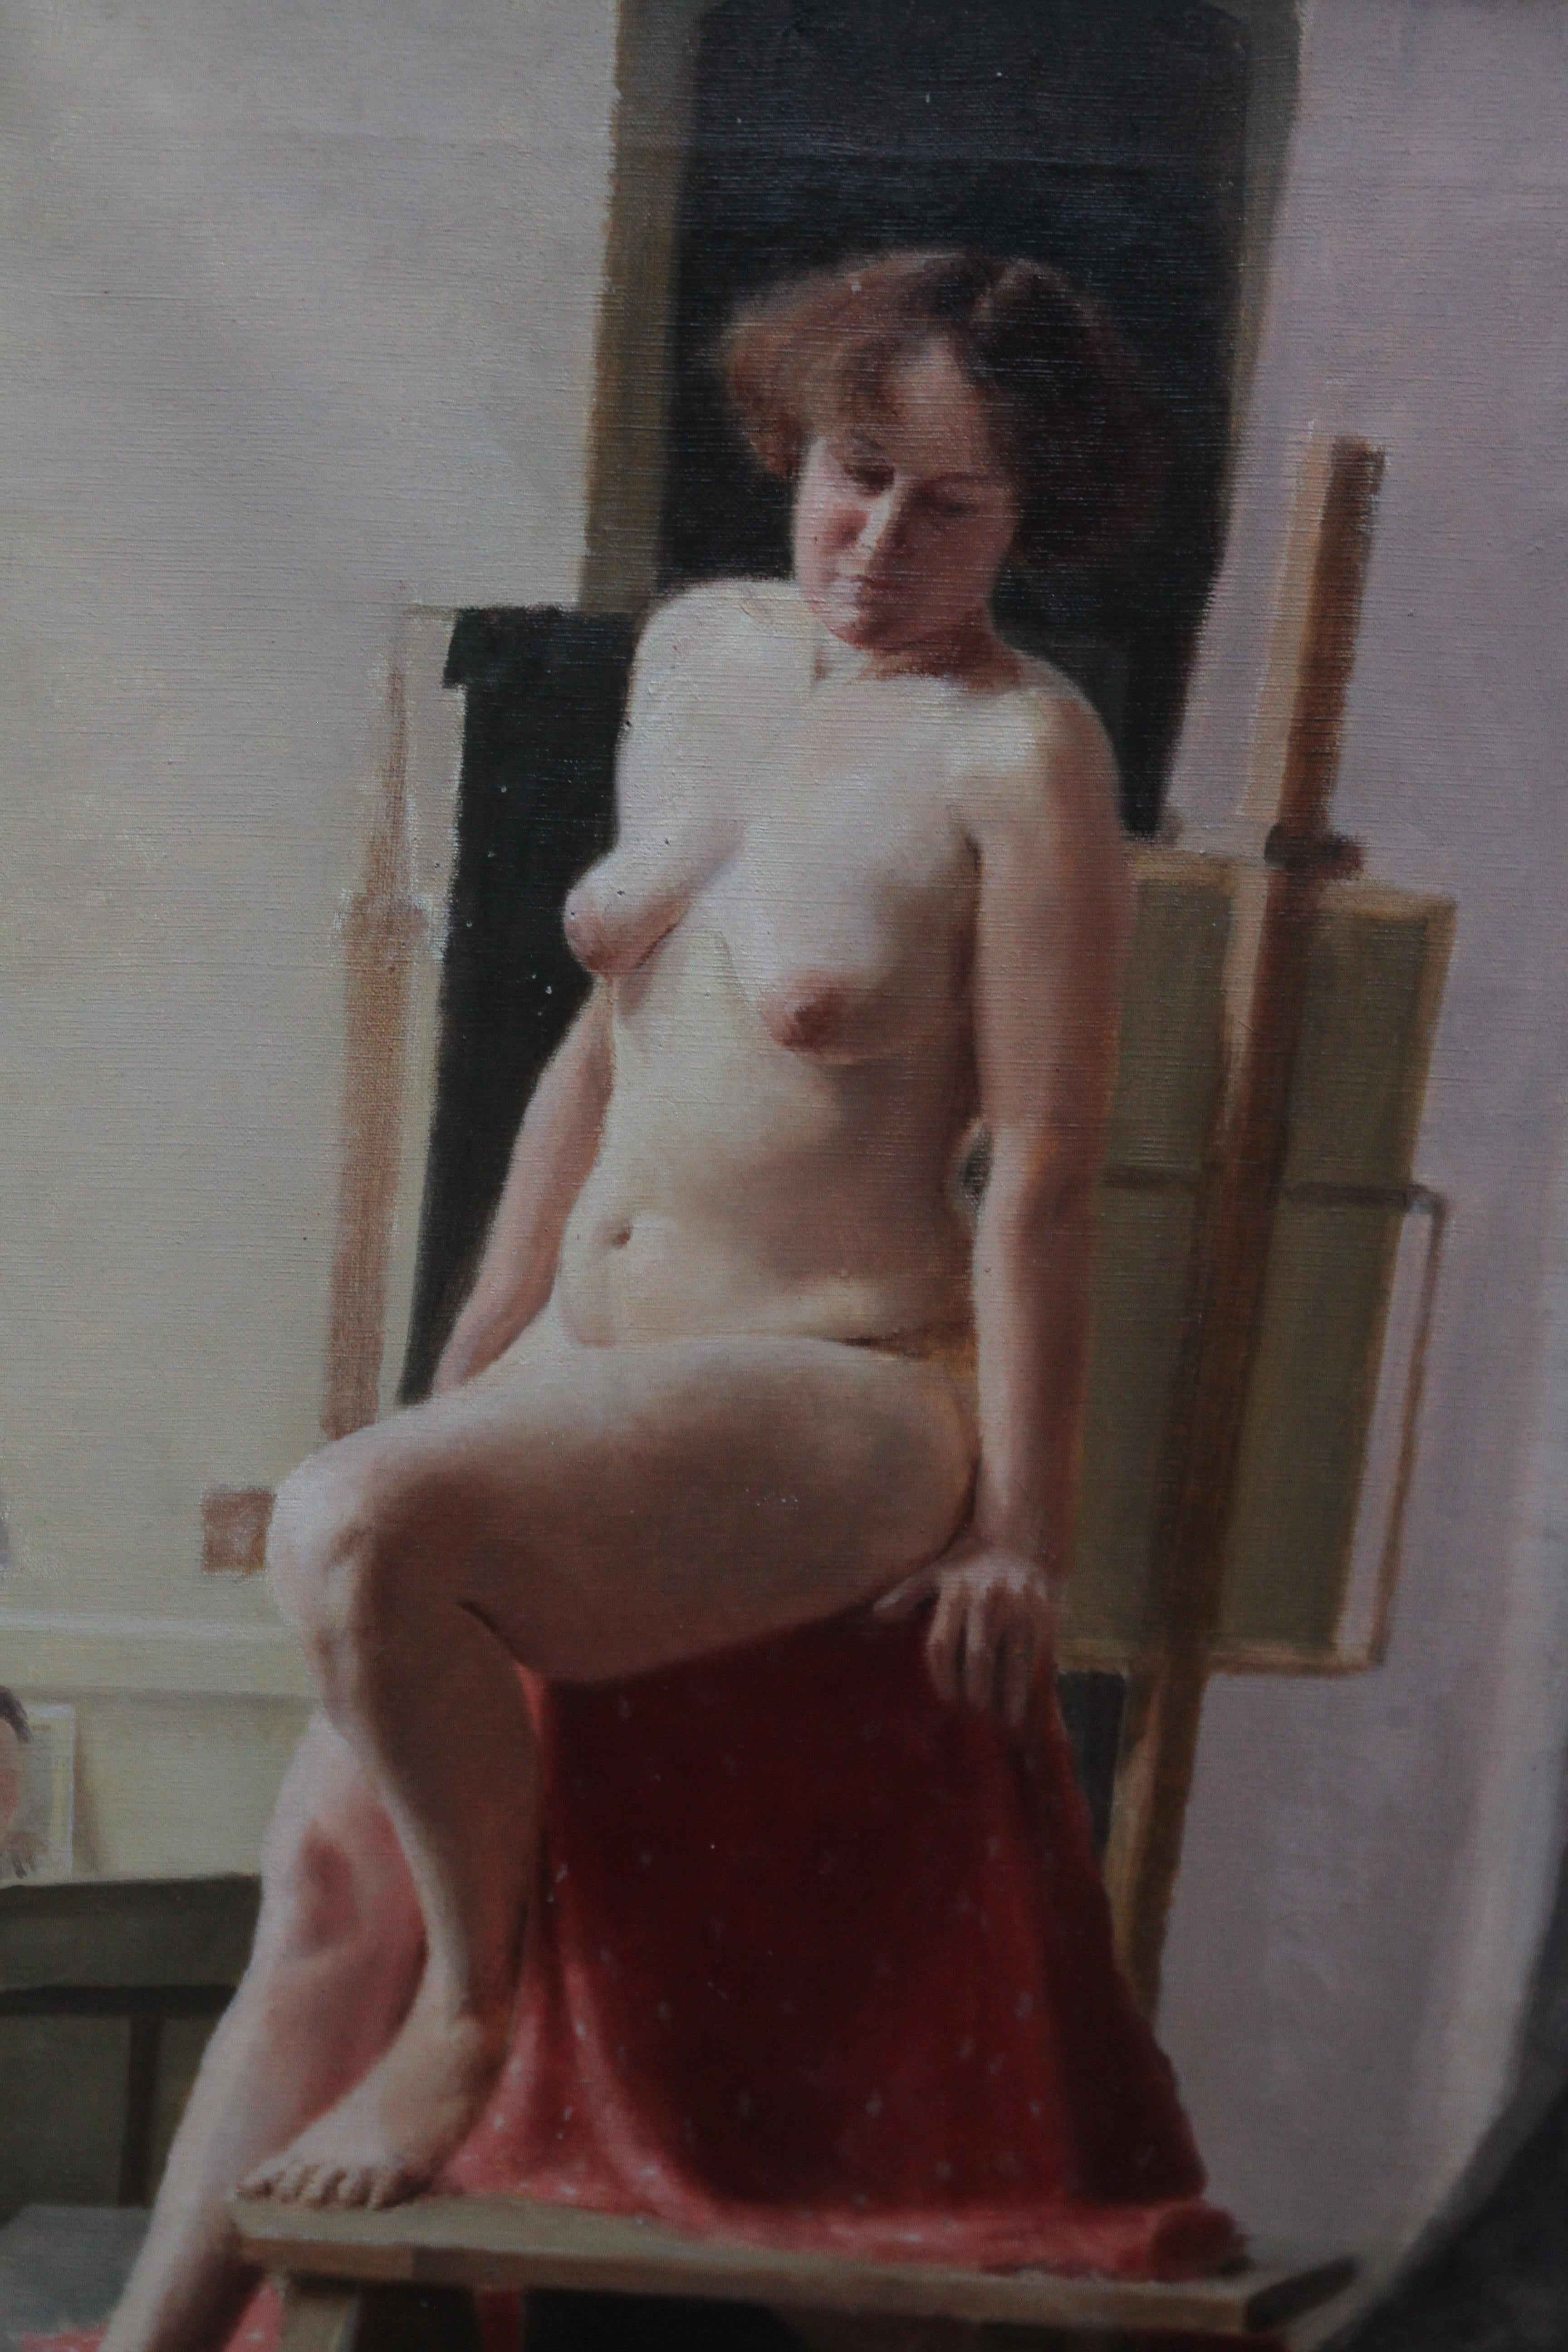 Seated Nude Model in Art Class - British 40's Slade School portrait oil painting - Post-Impressionist Painting by E.A. Jay